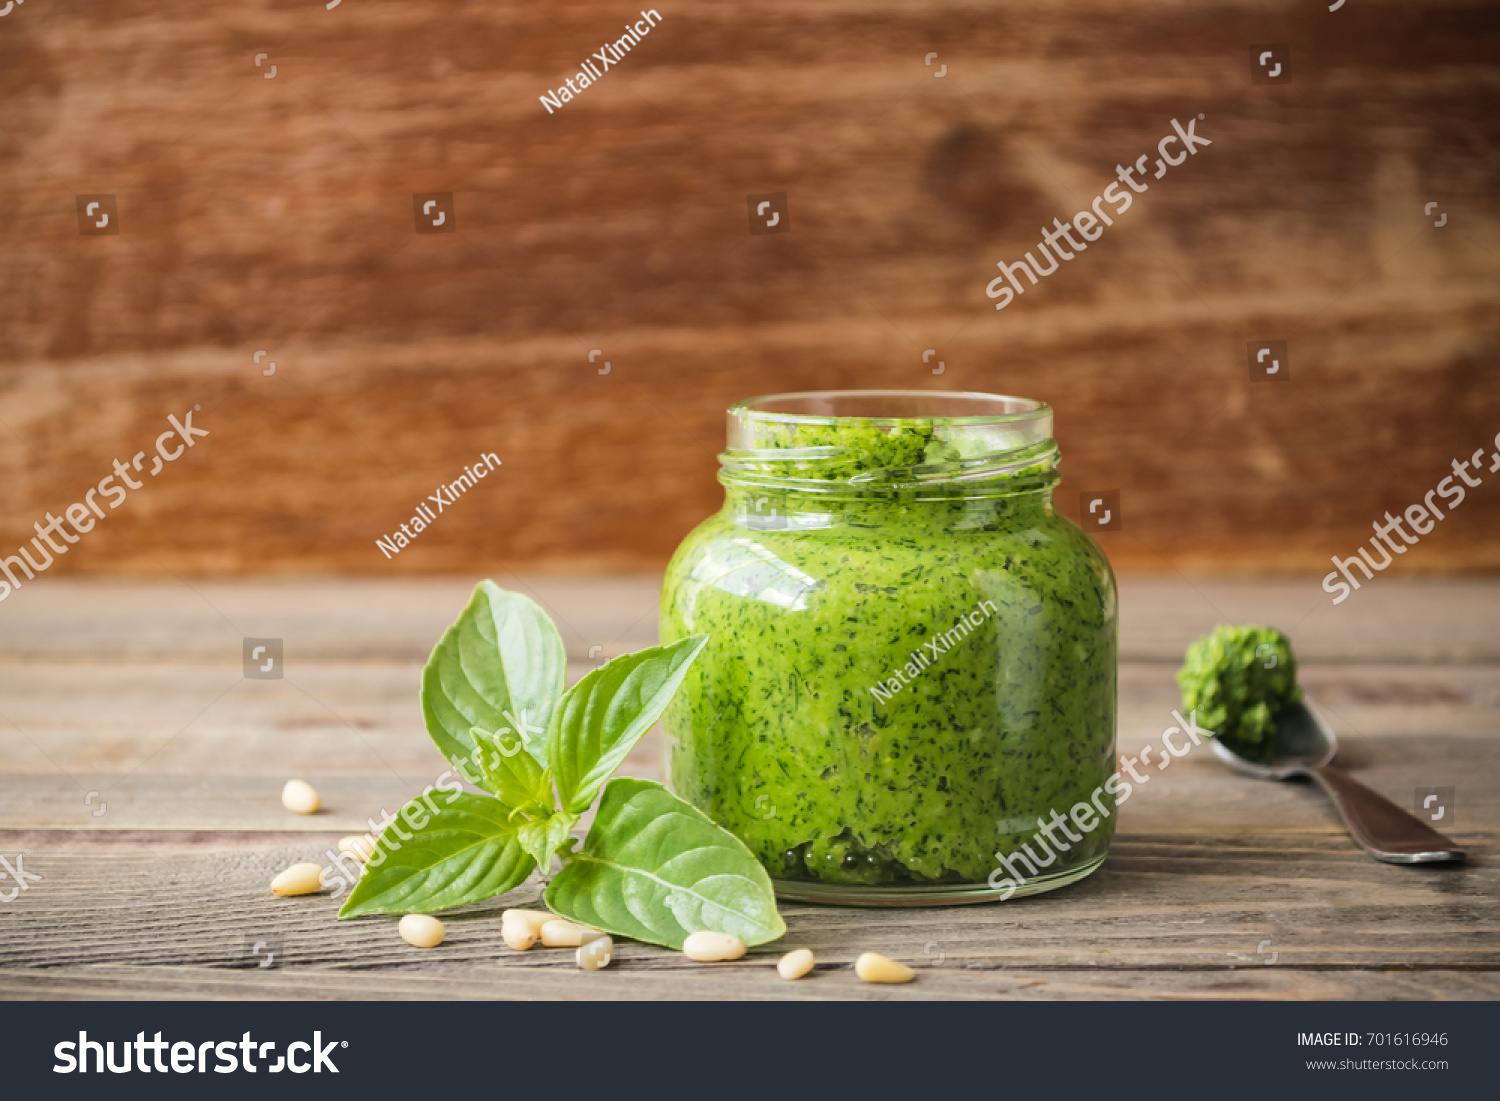 Homemade pesto sauce fresh Basil and nuts on wooden brown background. A copy of the places. Soft focus. The horizontal frame.Front view. #701616946